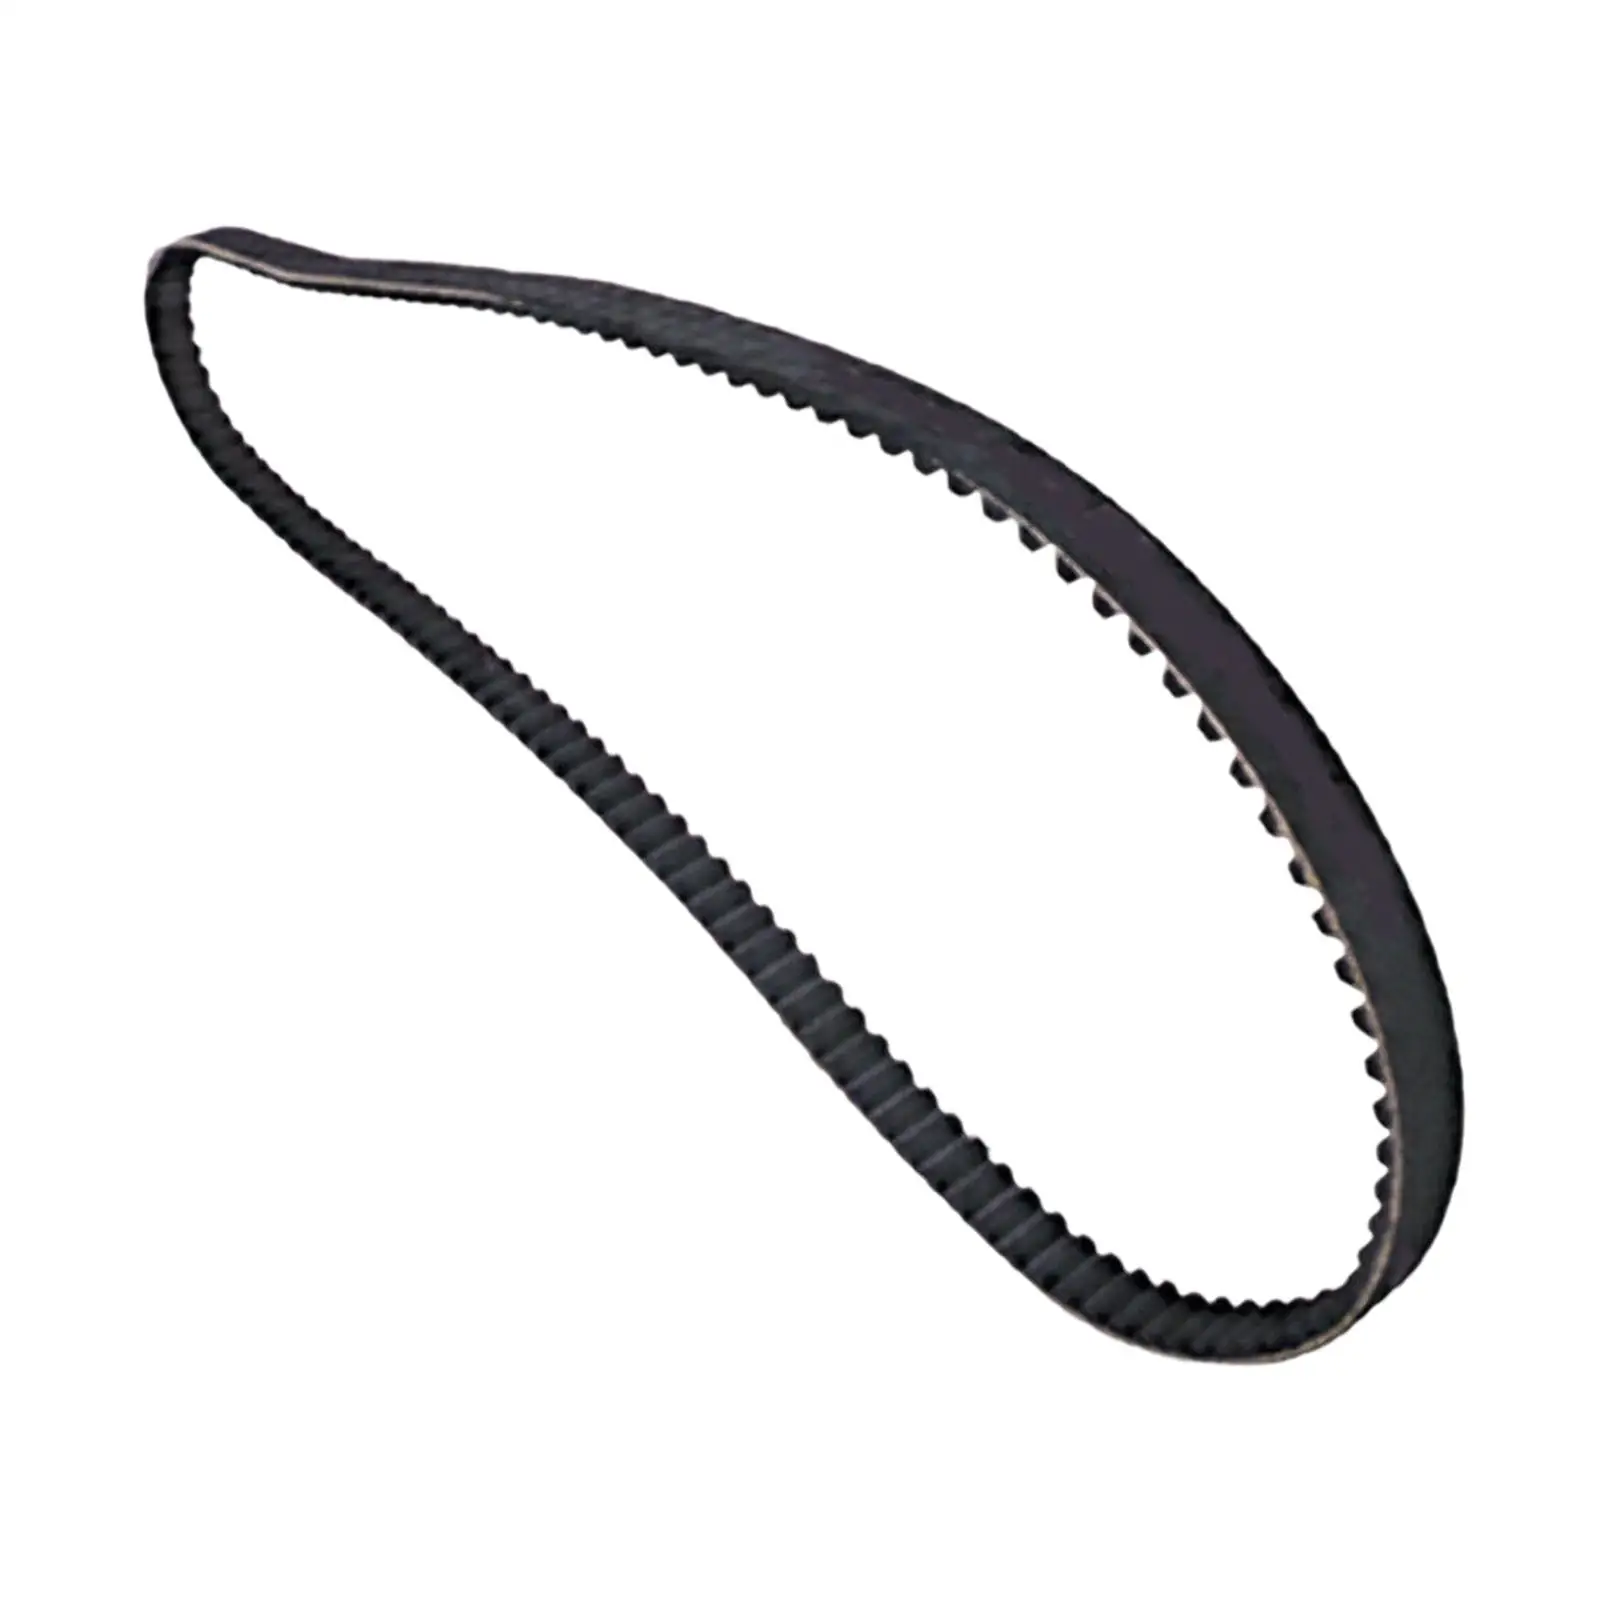 Rear Drive Belt 40015-90 133 Tooth 1 1/2